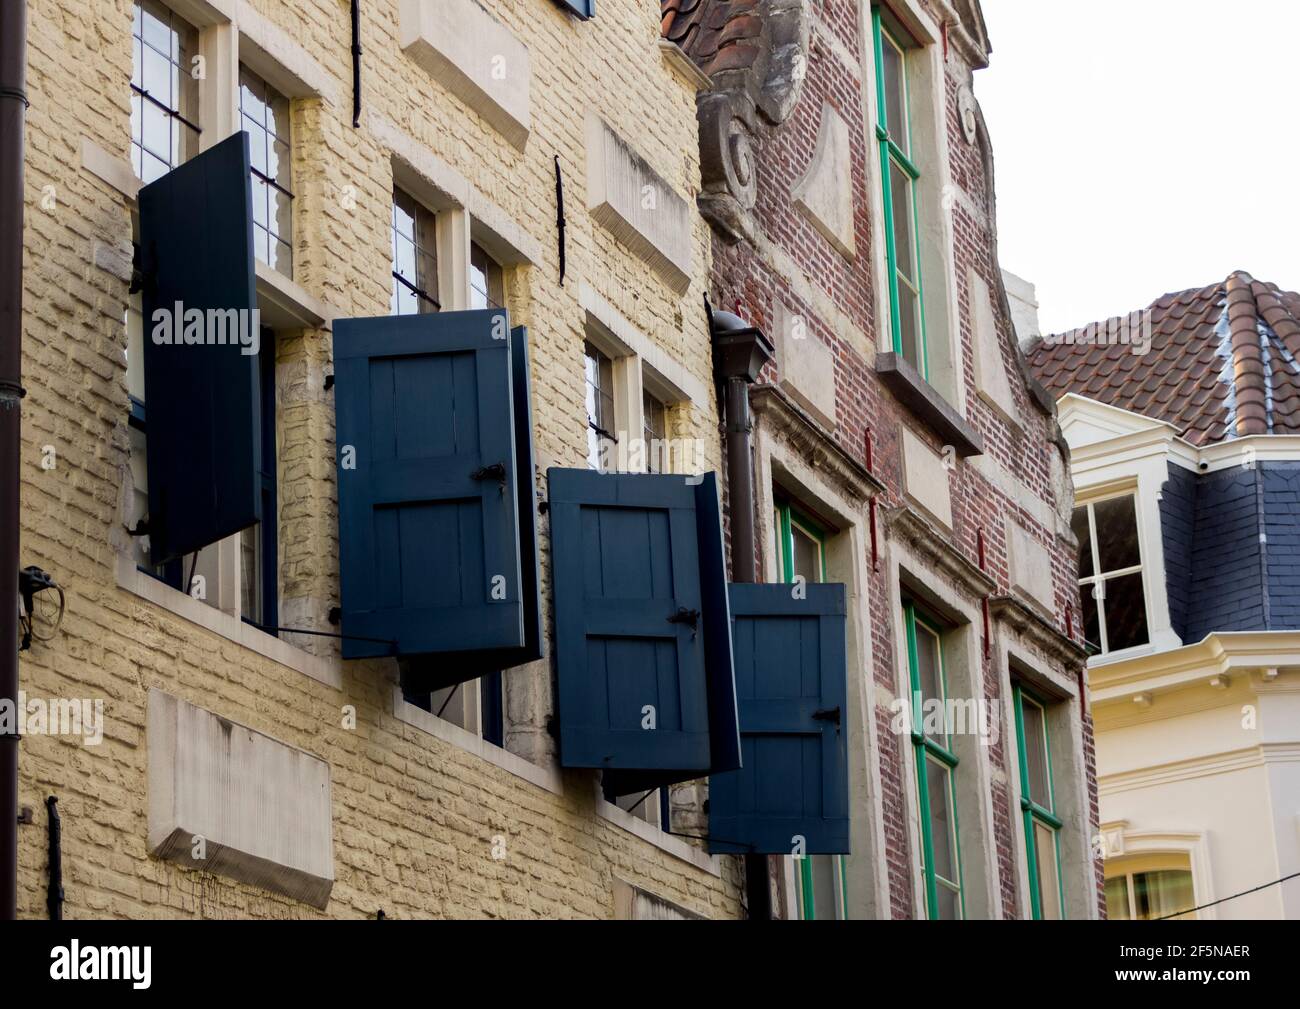 Upstairs windows with blue shutters on an old yellow, brick building in the Patershol district of Ghent, Belgium Stock Photo